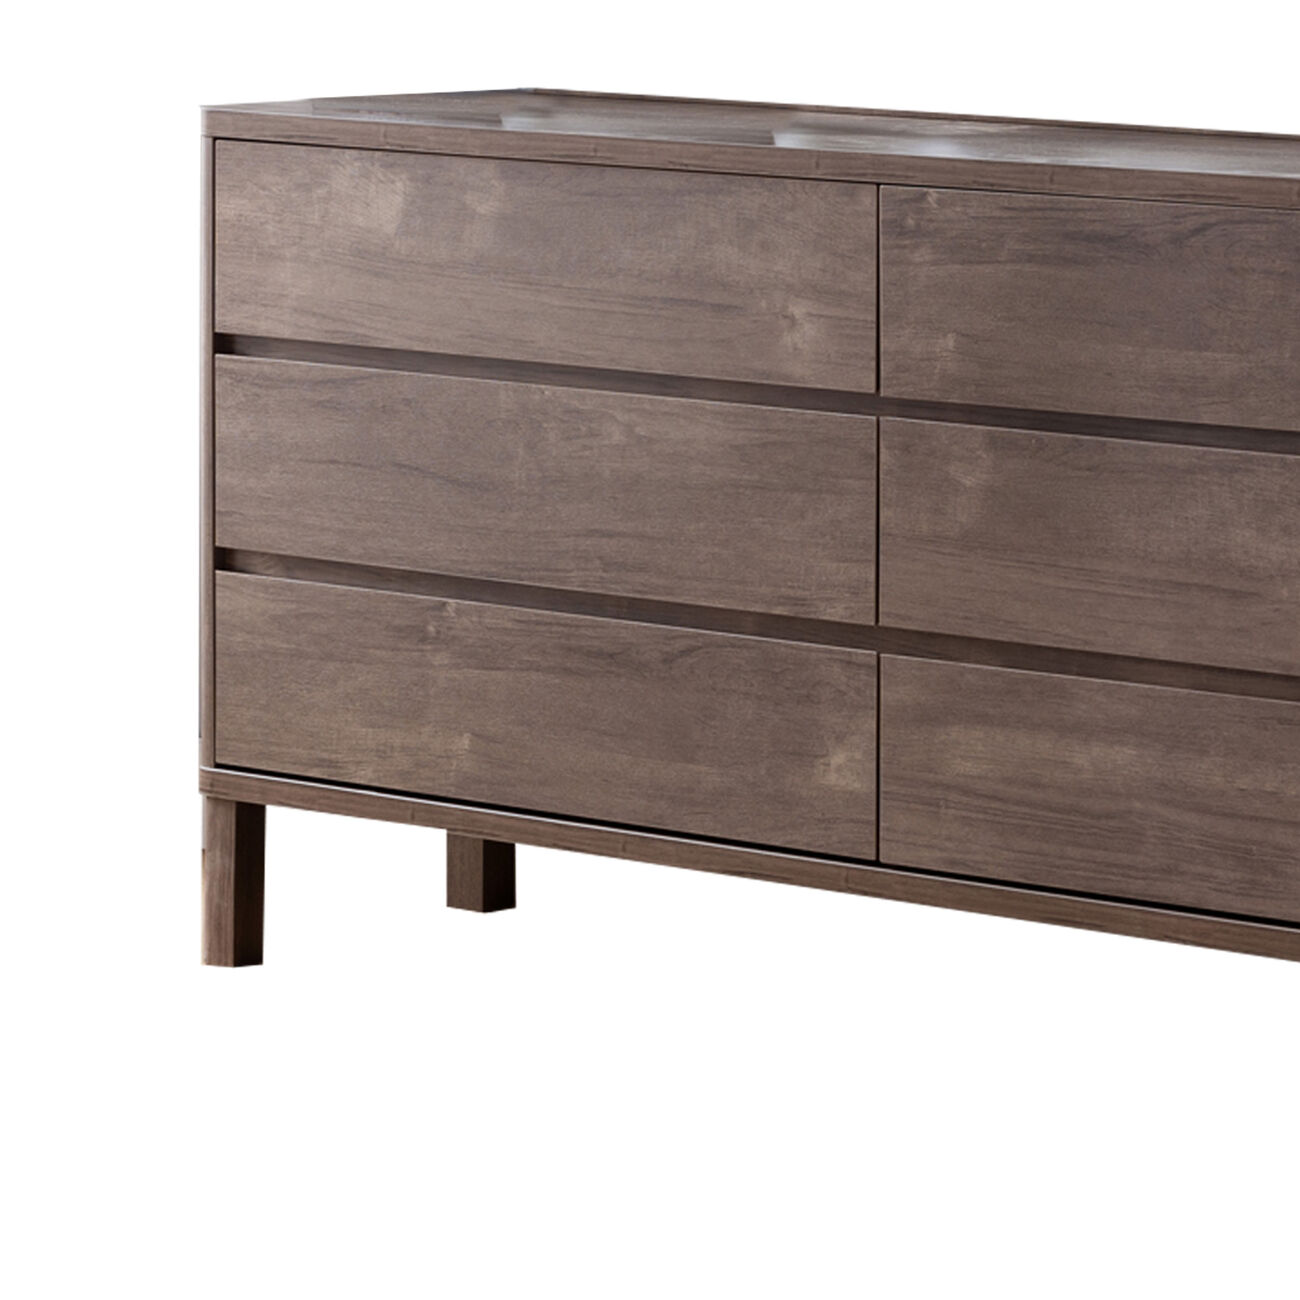 Wooden Frame Dresser with 6 Drawers and Straight Legs, Hazelnut Brown